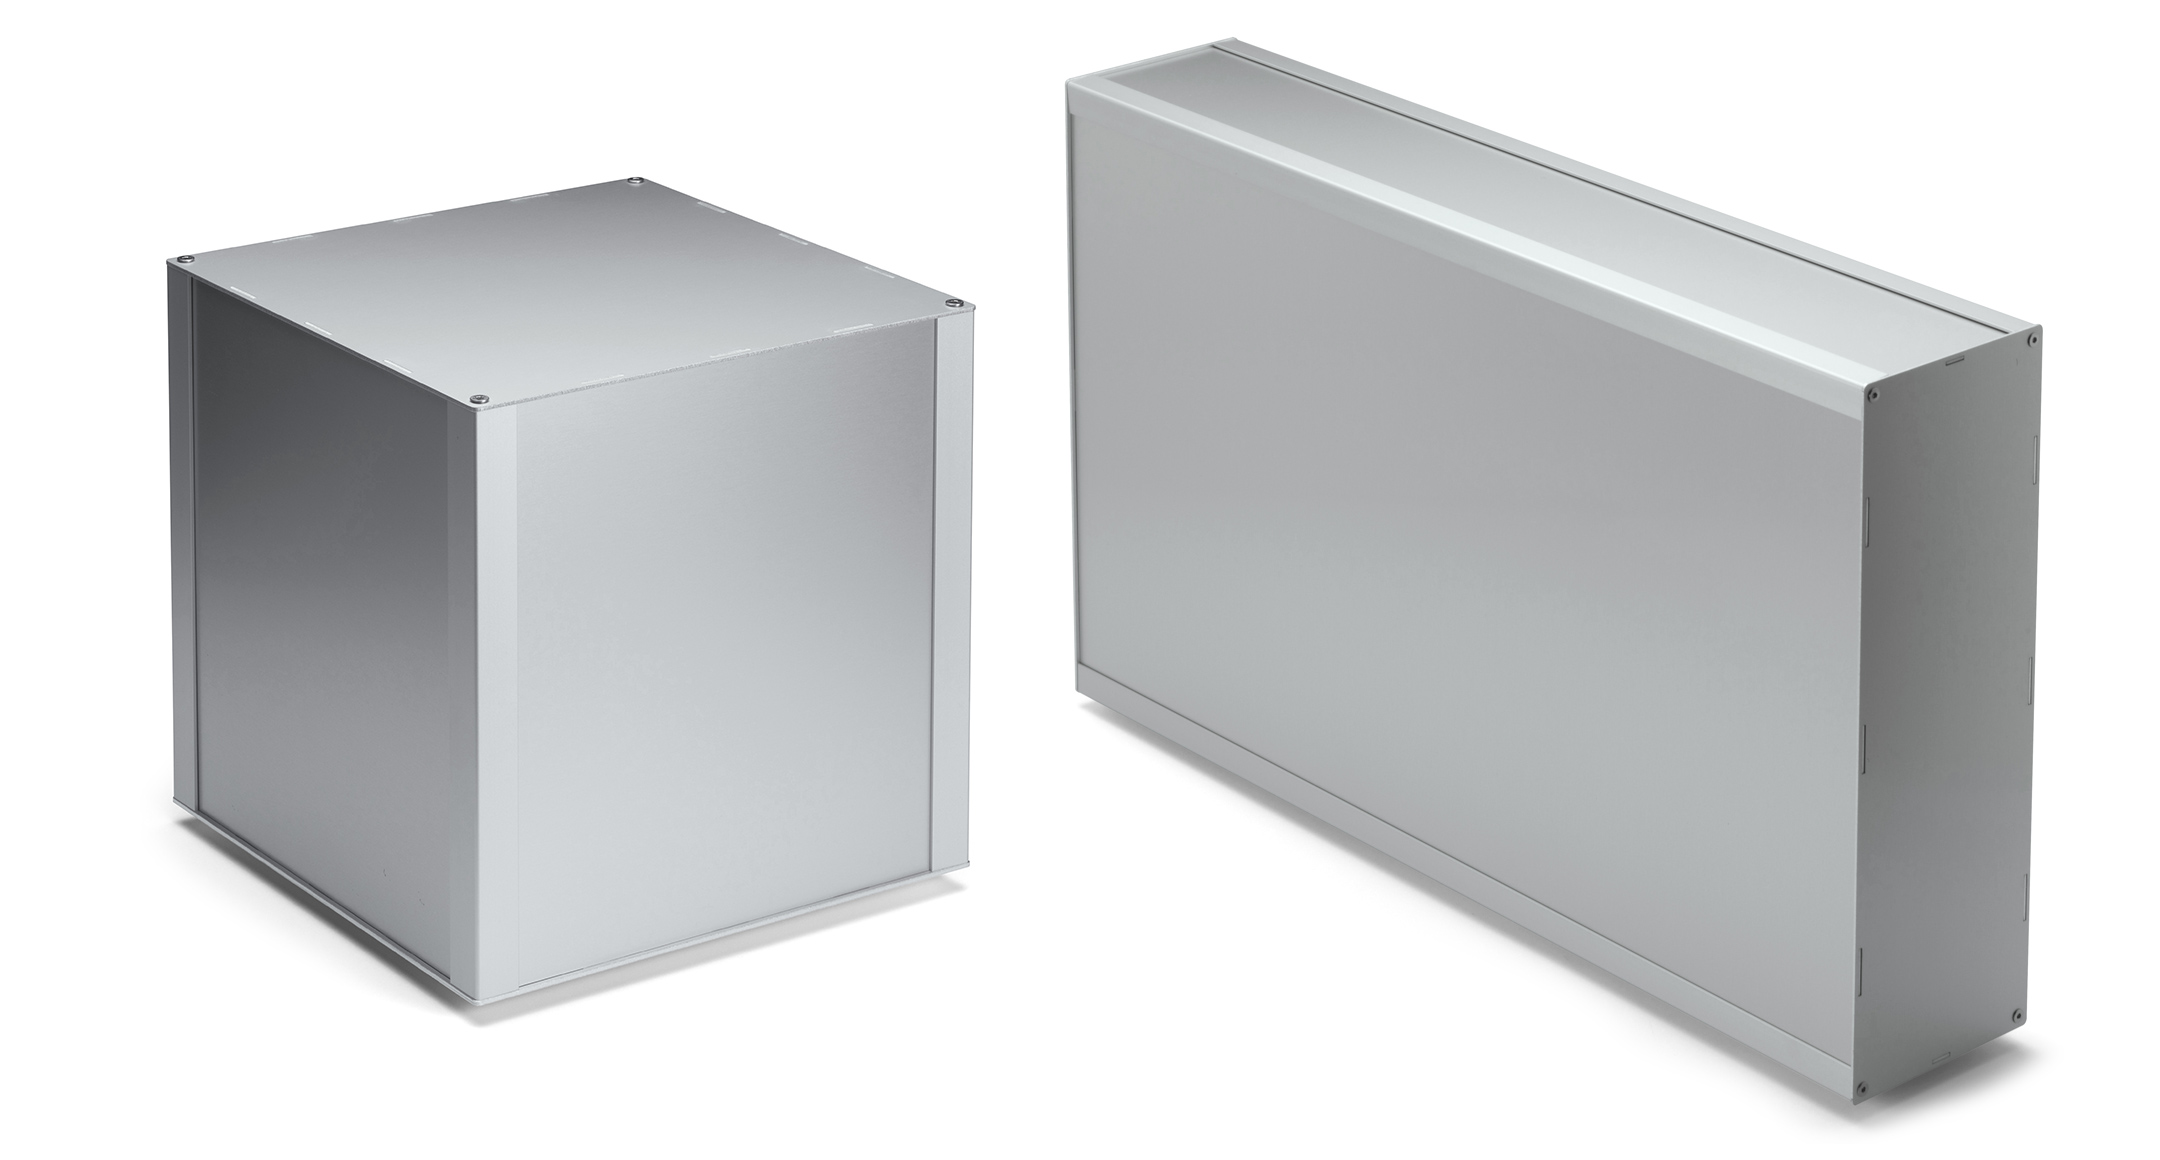 CUSTOM SIZED ALUMINUM FRAME BOX - ALSF series, PRODUCTS